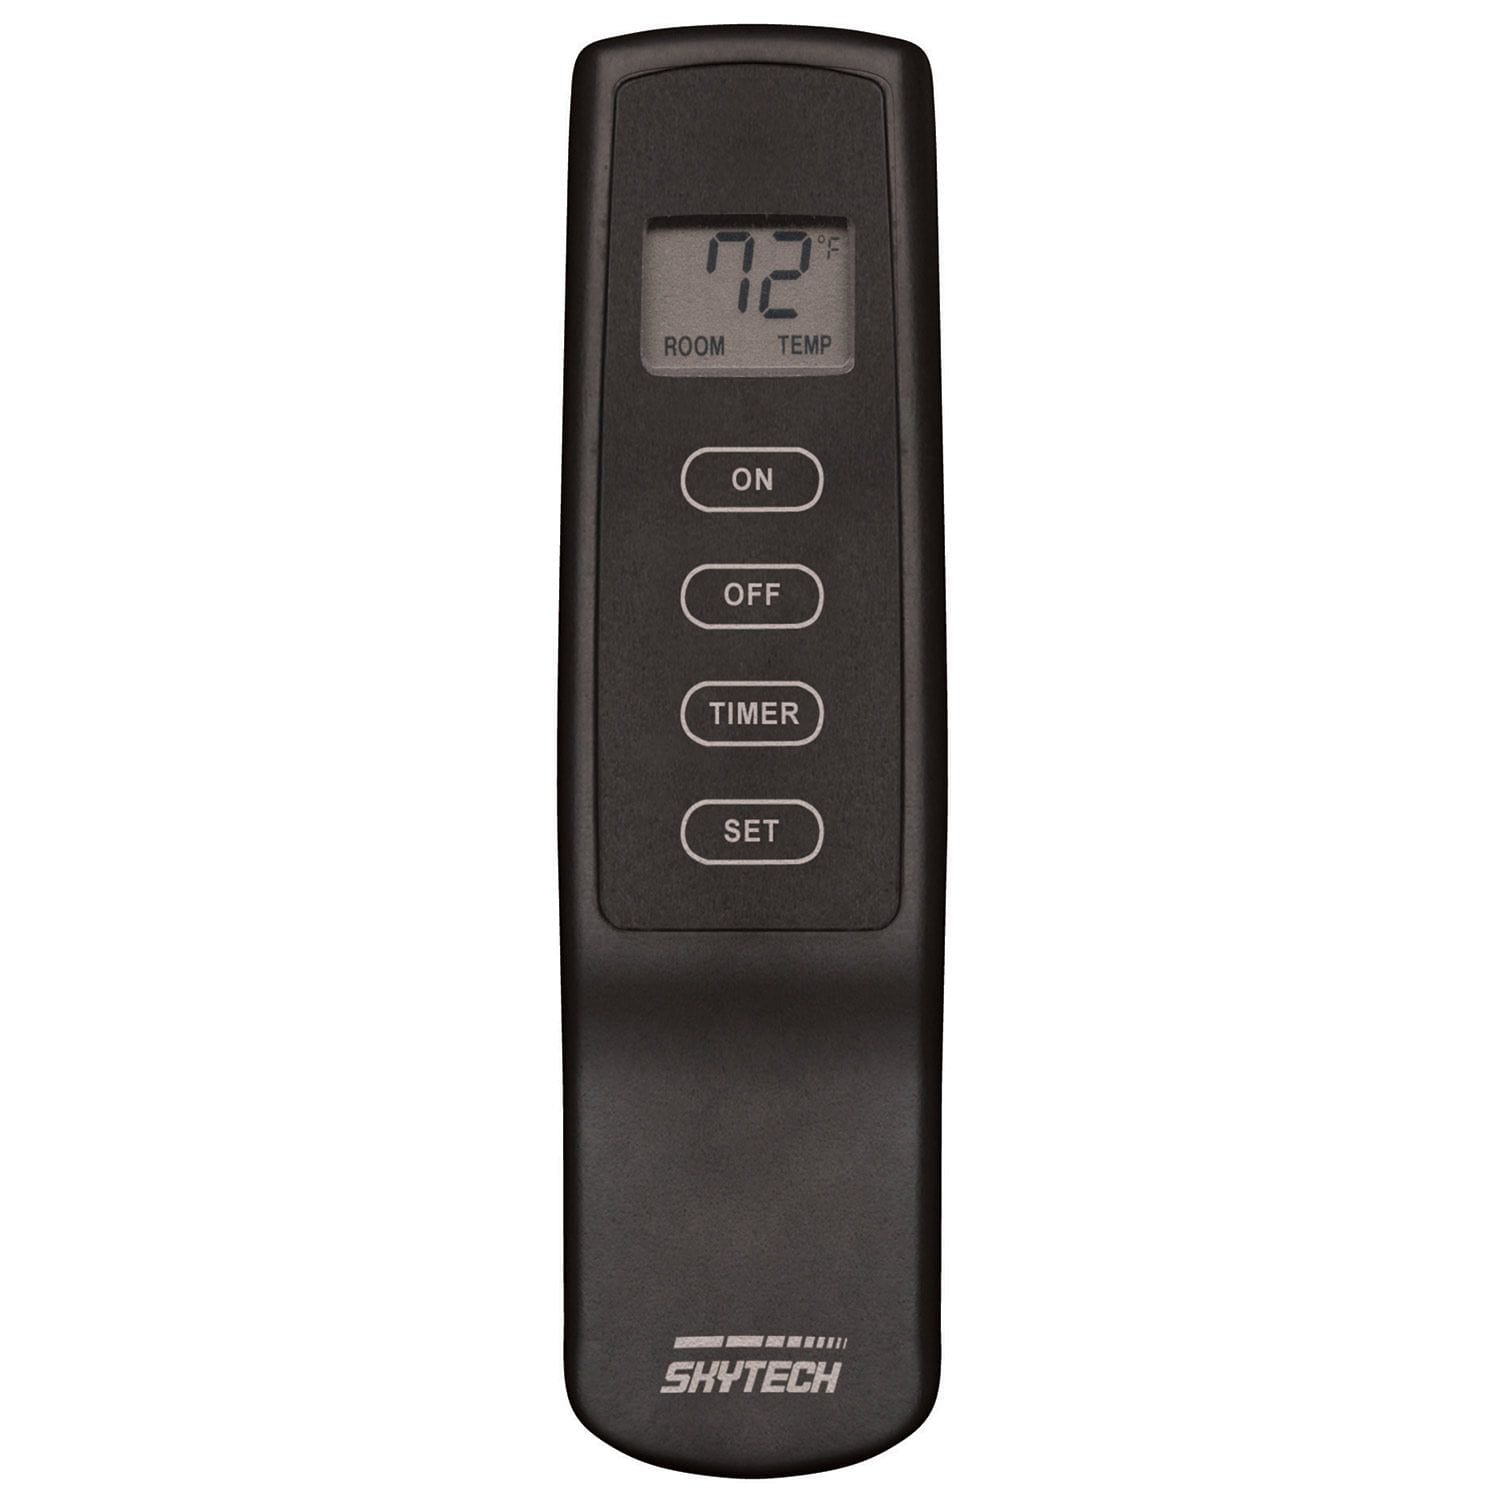 Firegear Firegear Remotes, Receivers, Timers Firegear - On/Off Remote Control w/110V Receiver/Battery Operated Transmitter